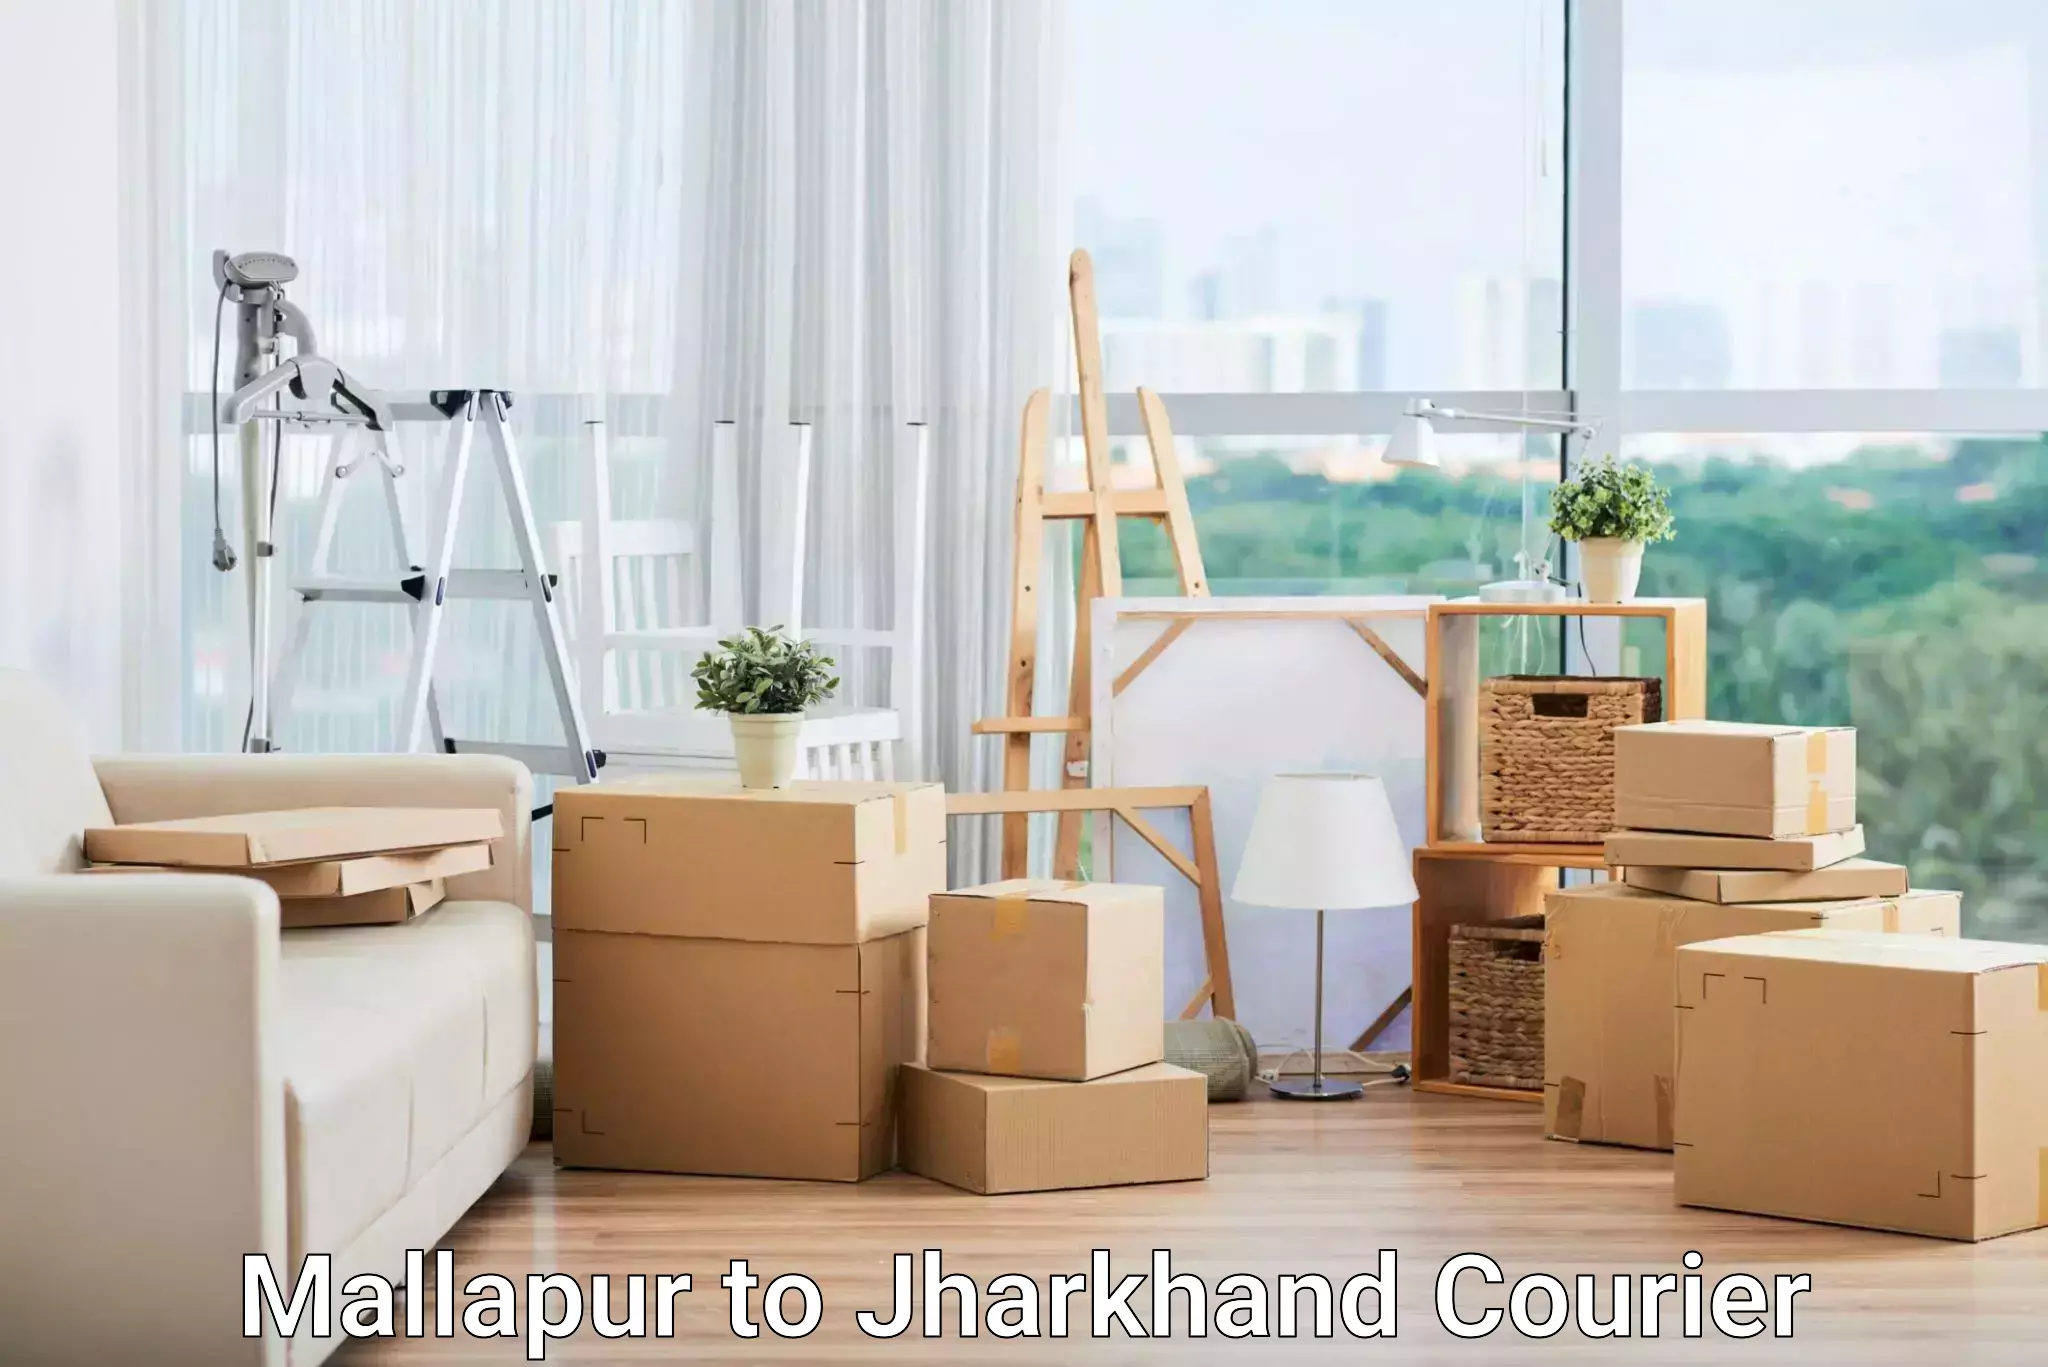 State-of-the-art courier technology Mallapur to Bagodar